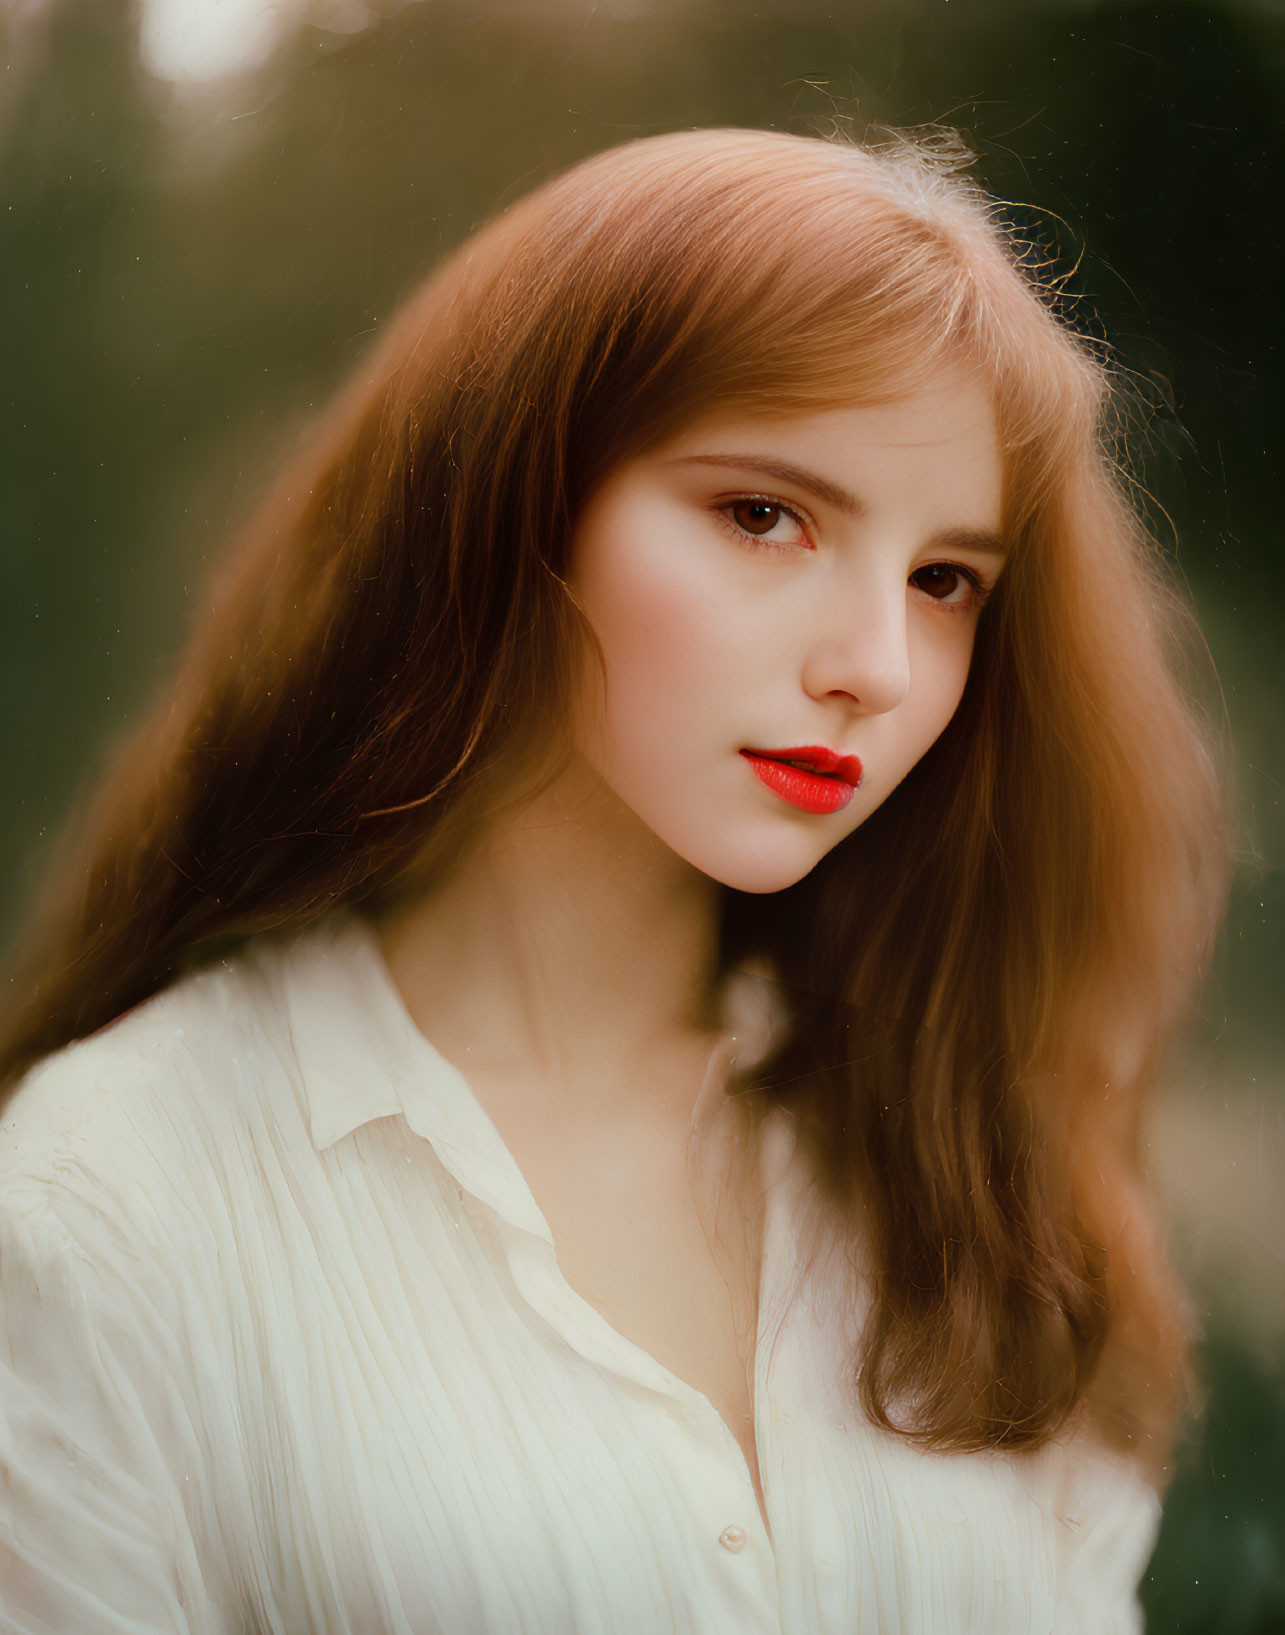 Portrait of young woman with auburn hair, red lipstick, white blouse